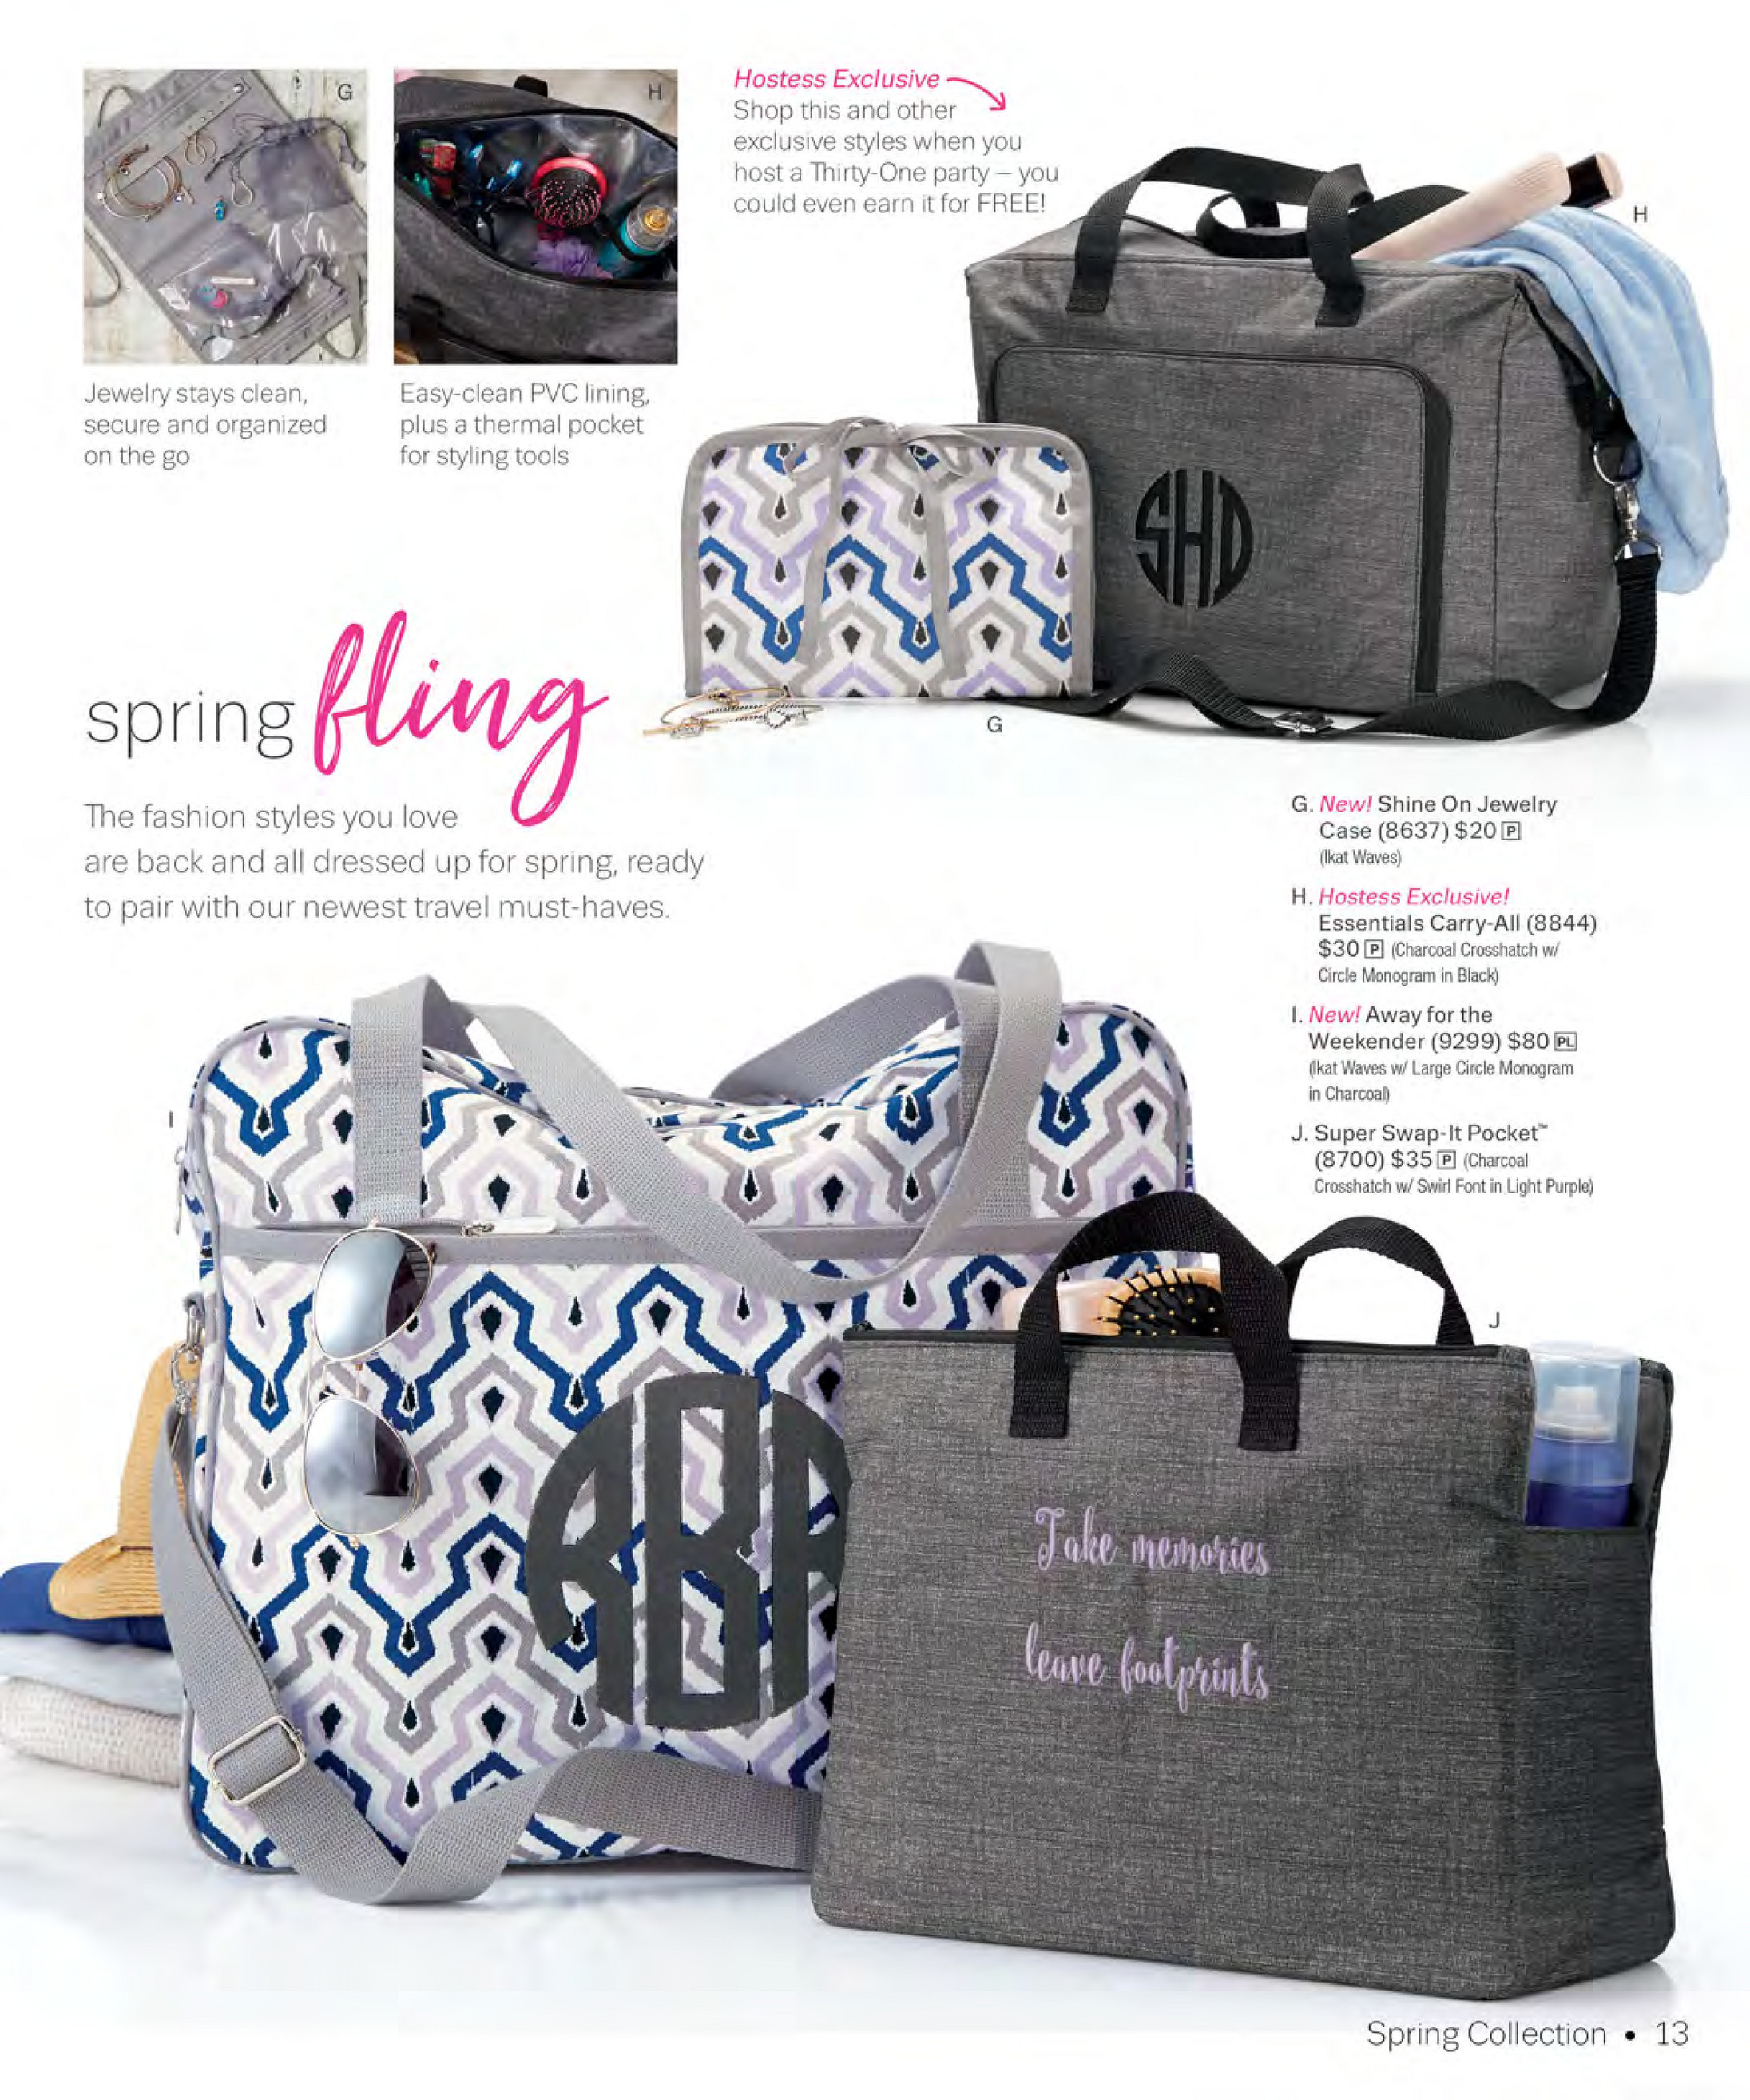 Thirty-One - QSG_F19_US_ISSUU_TOT - Page 4-5 - Created with Publitas.com